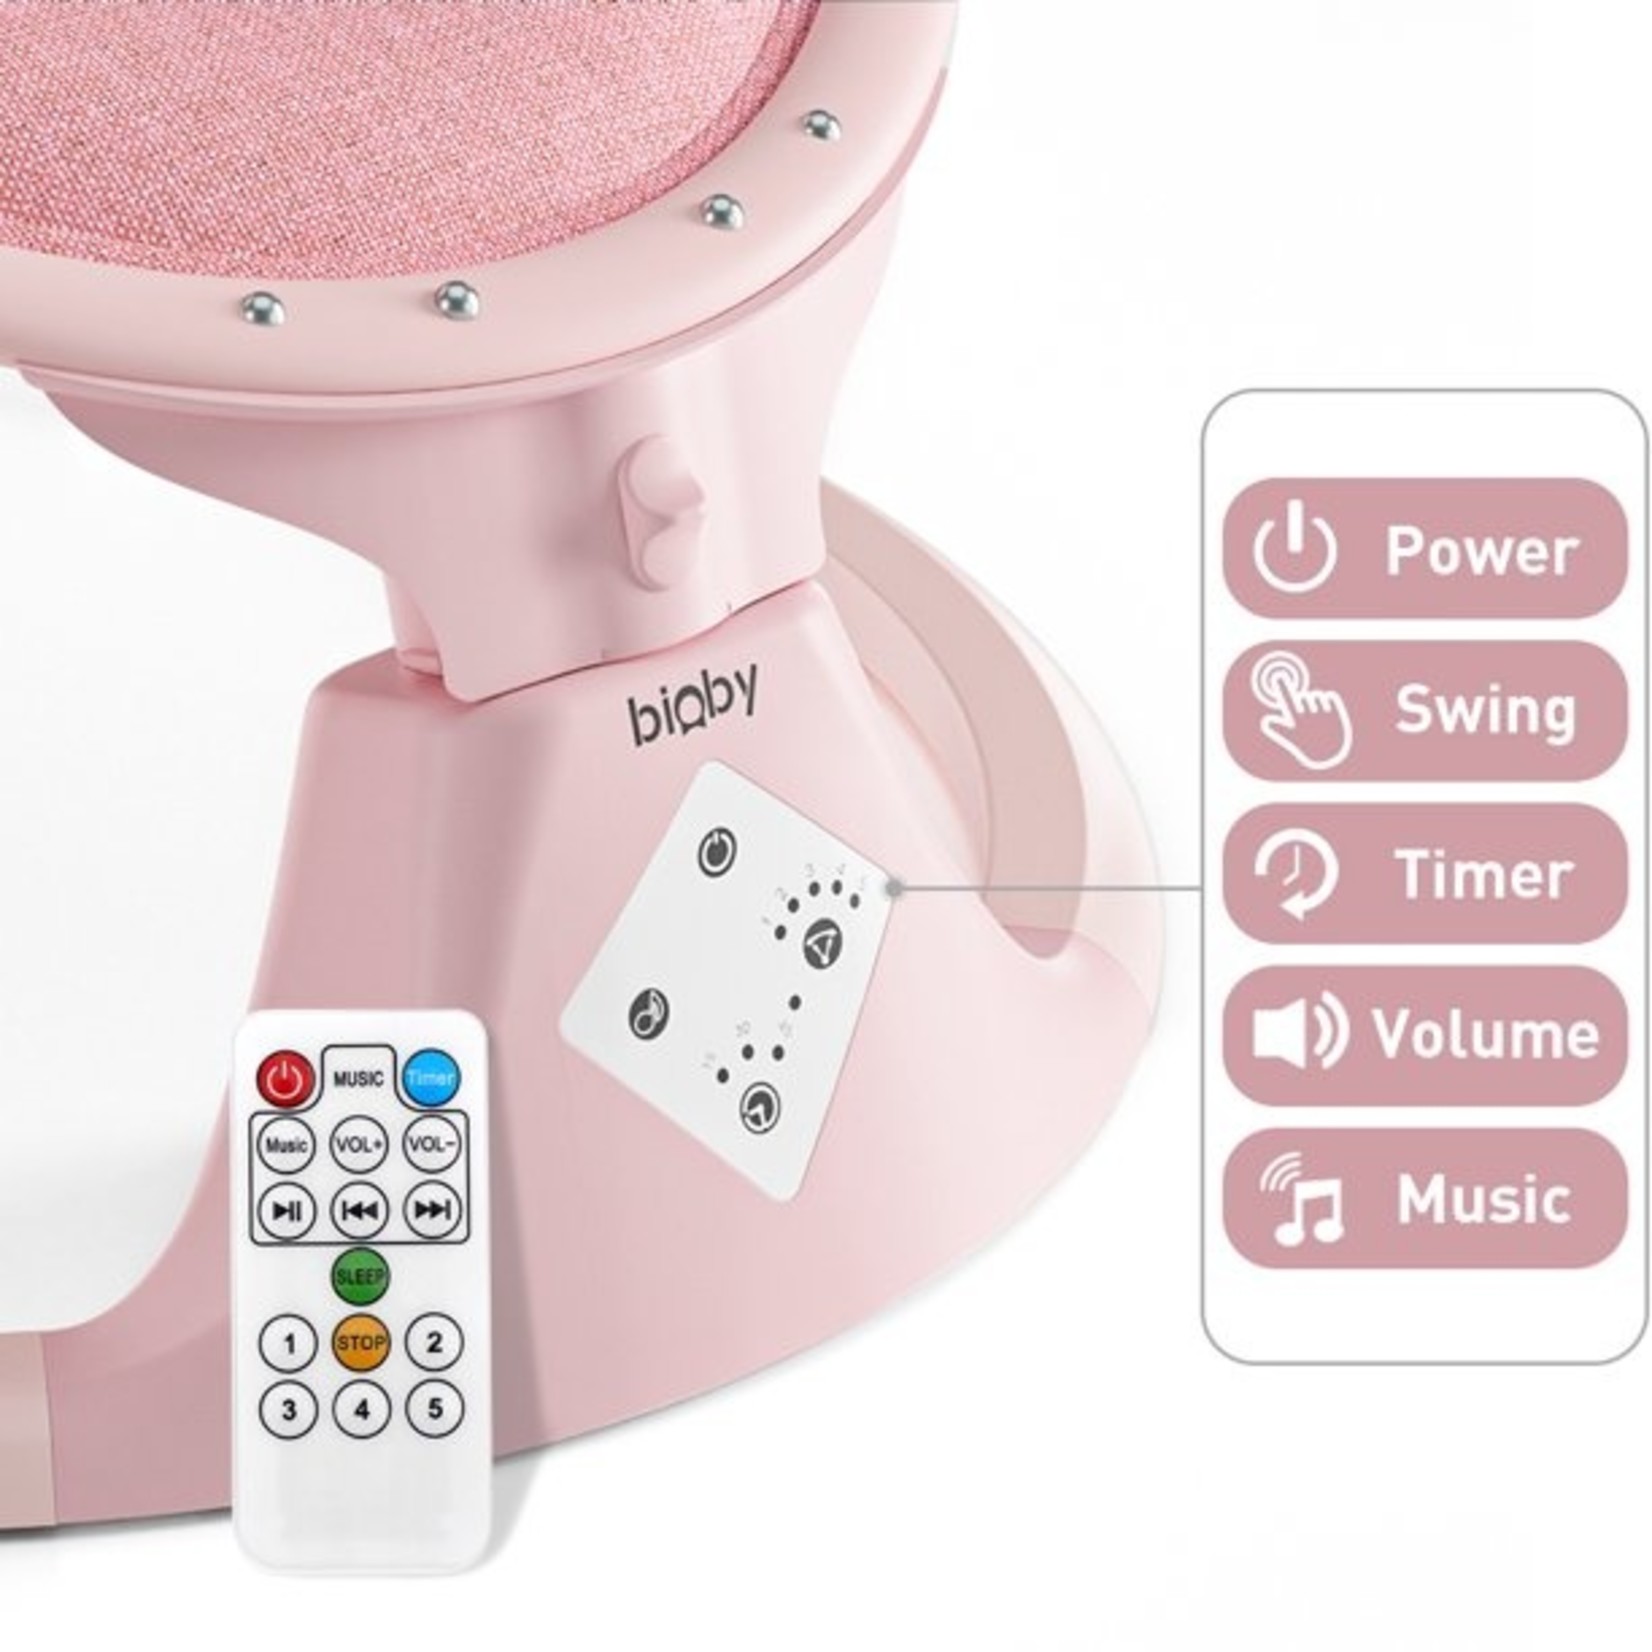 Bioby Baby Swing, Remote Control Baby Bouncer with 5-Speeds for Infants - Pink/Polka Dots